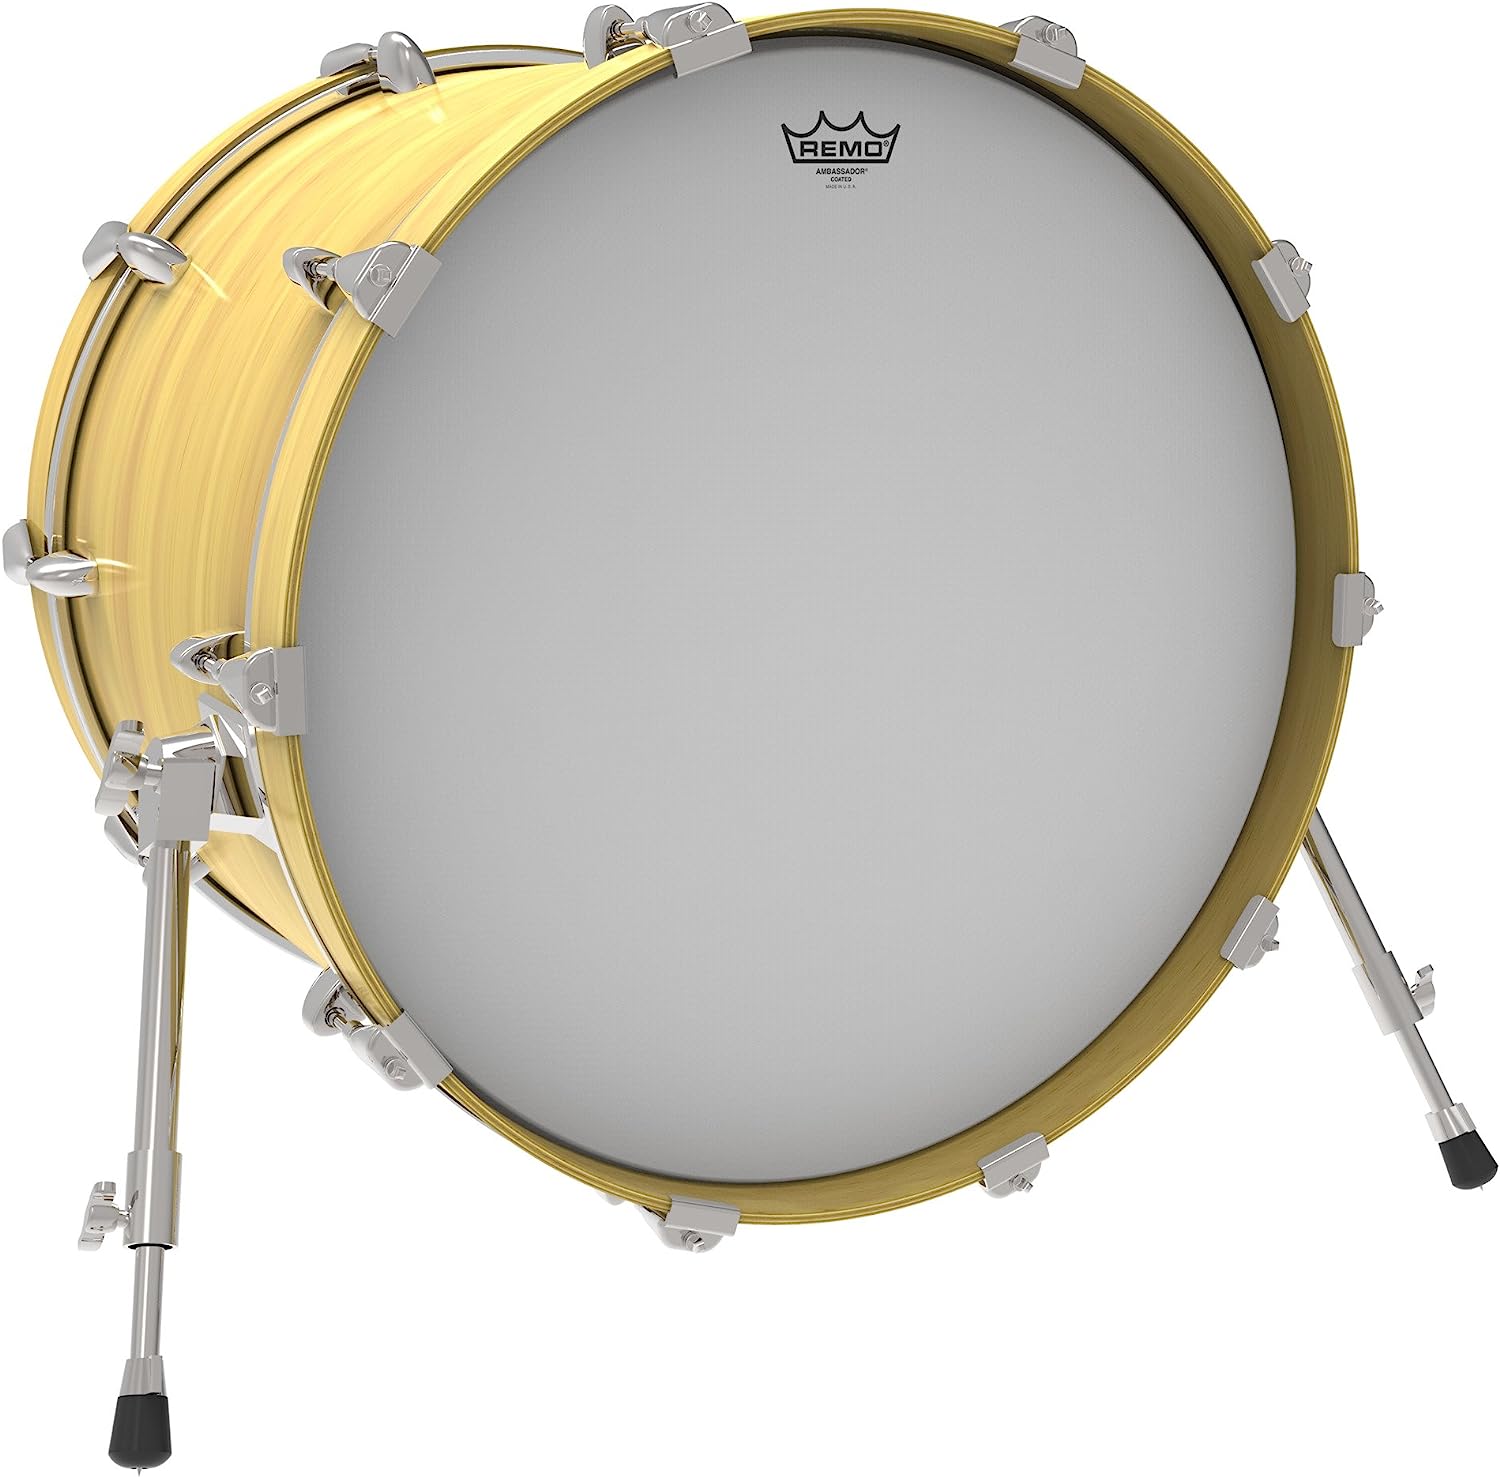 Remo BR-1124-00, Bass, Ambassador, Coated Drum Head, 24 inch